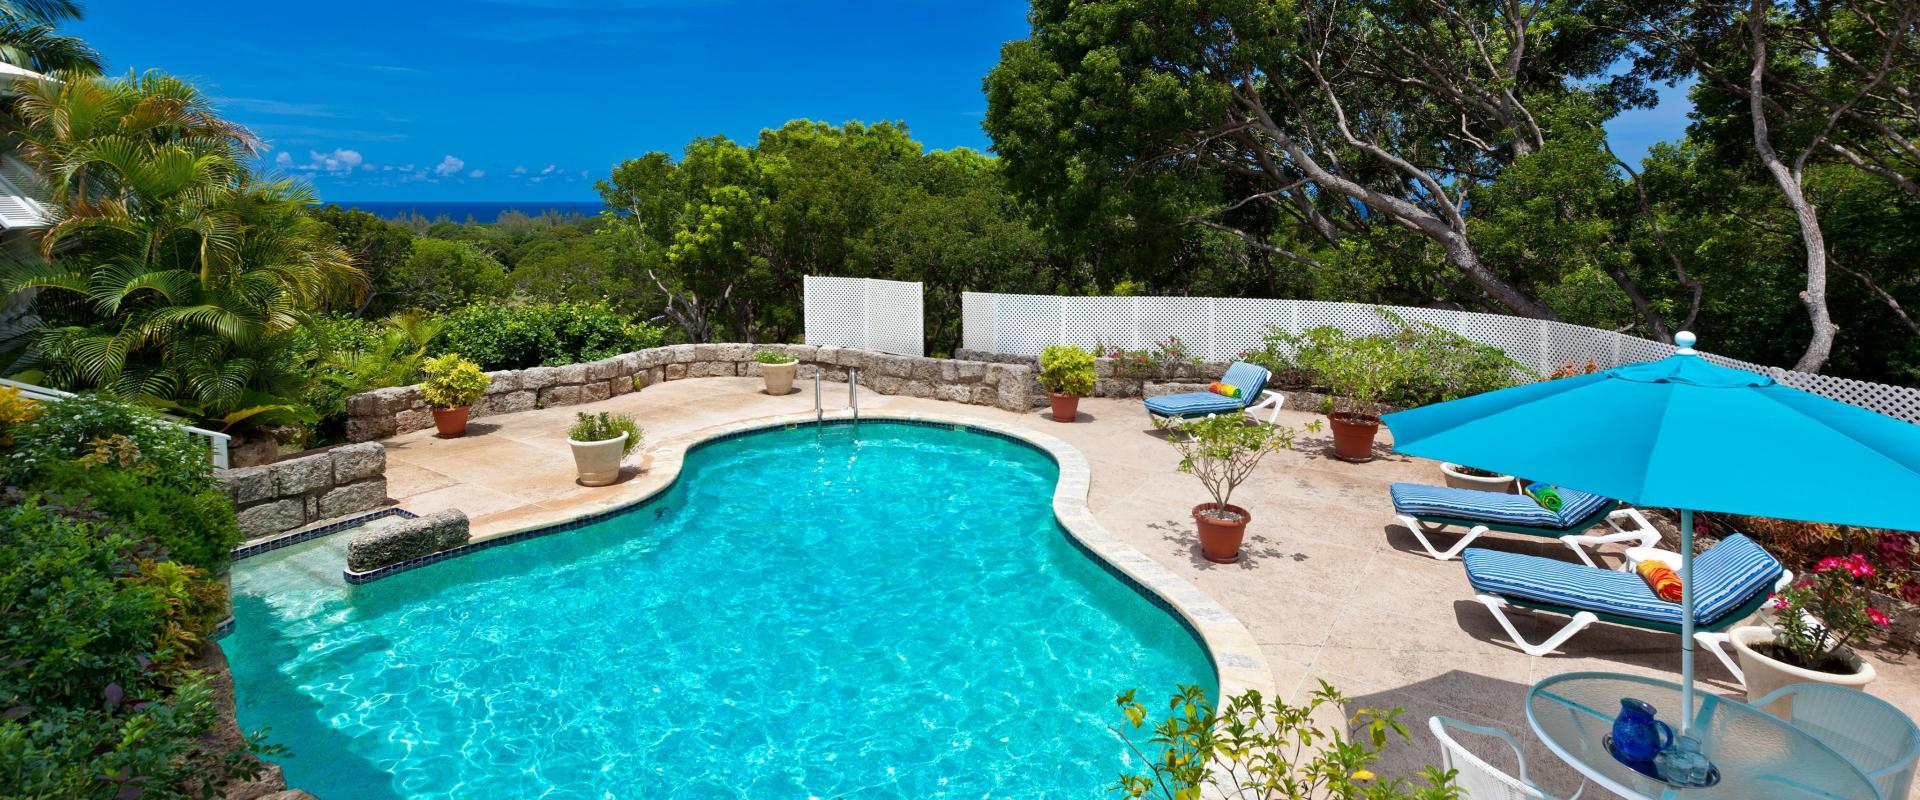 Sandy Lane Holiday Villa Barbados Halle Rose Swimming Pool and Loungers